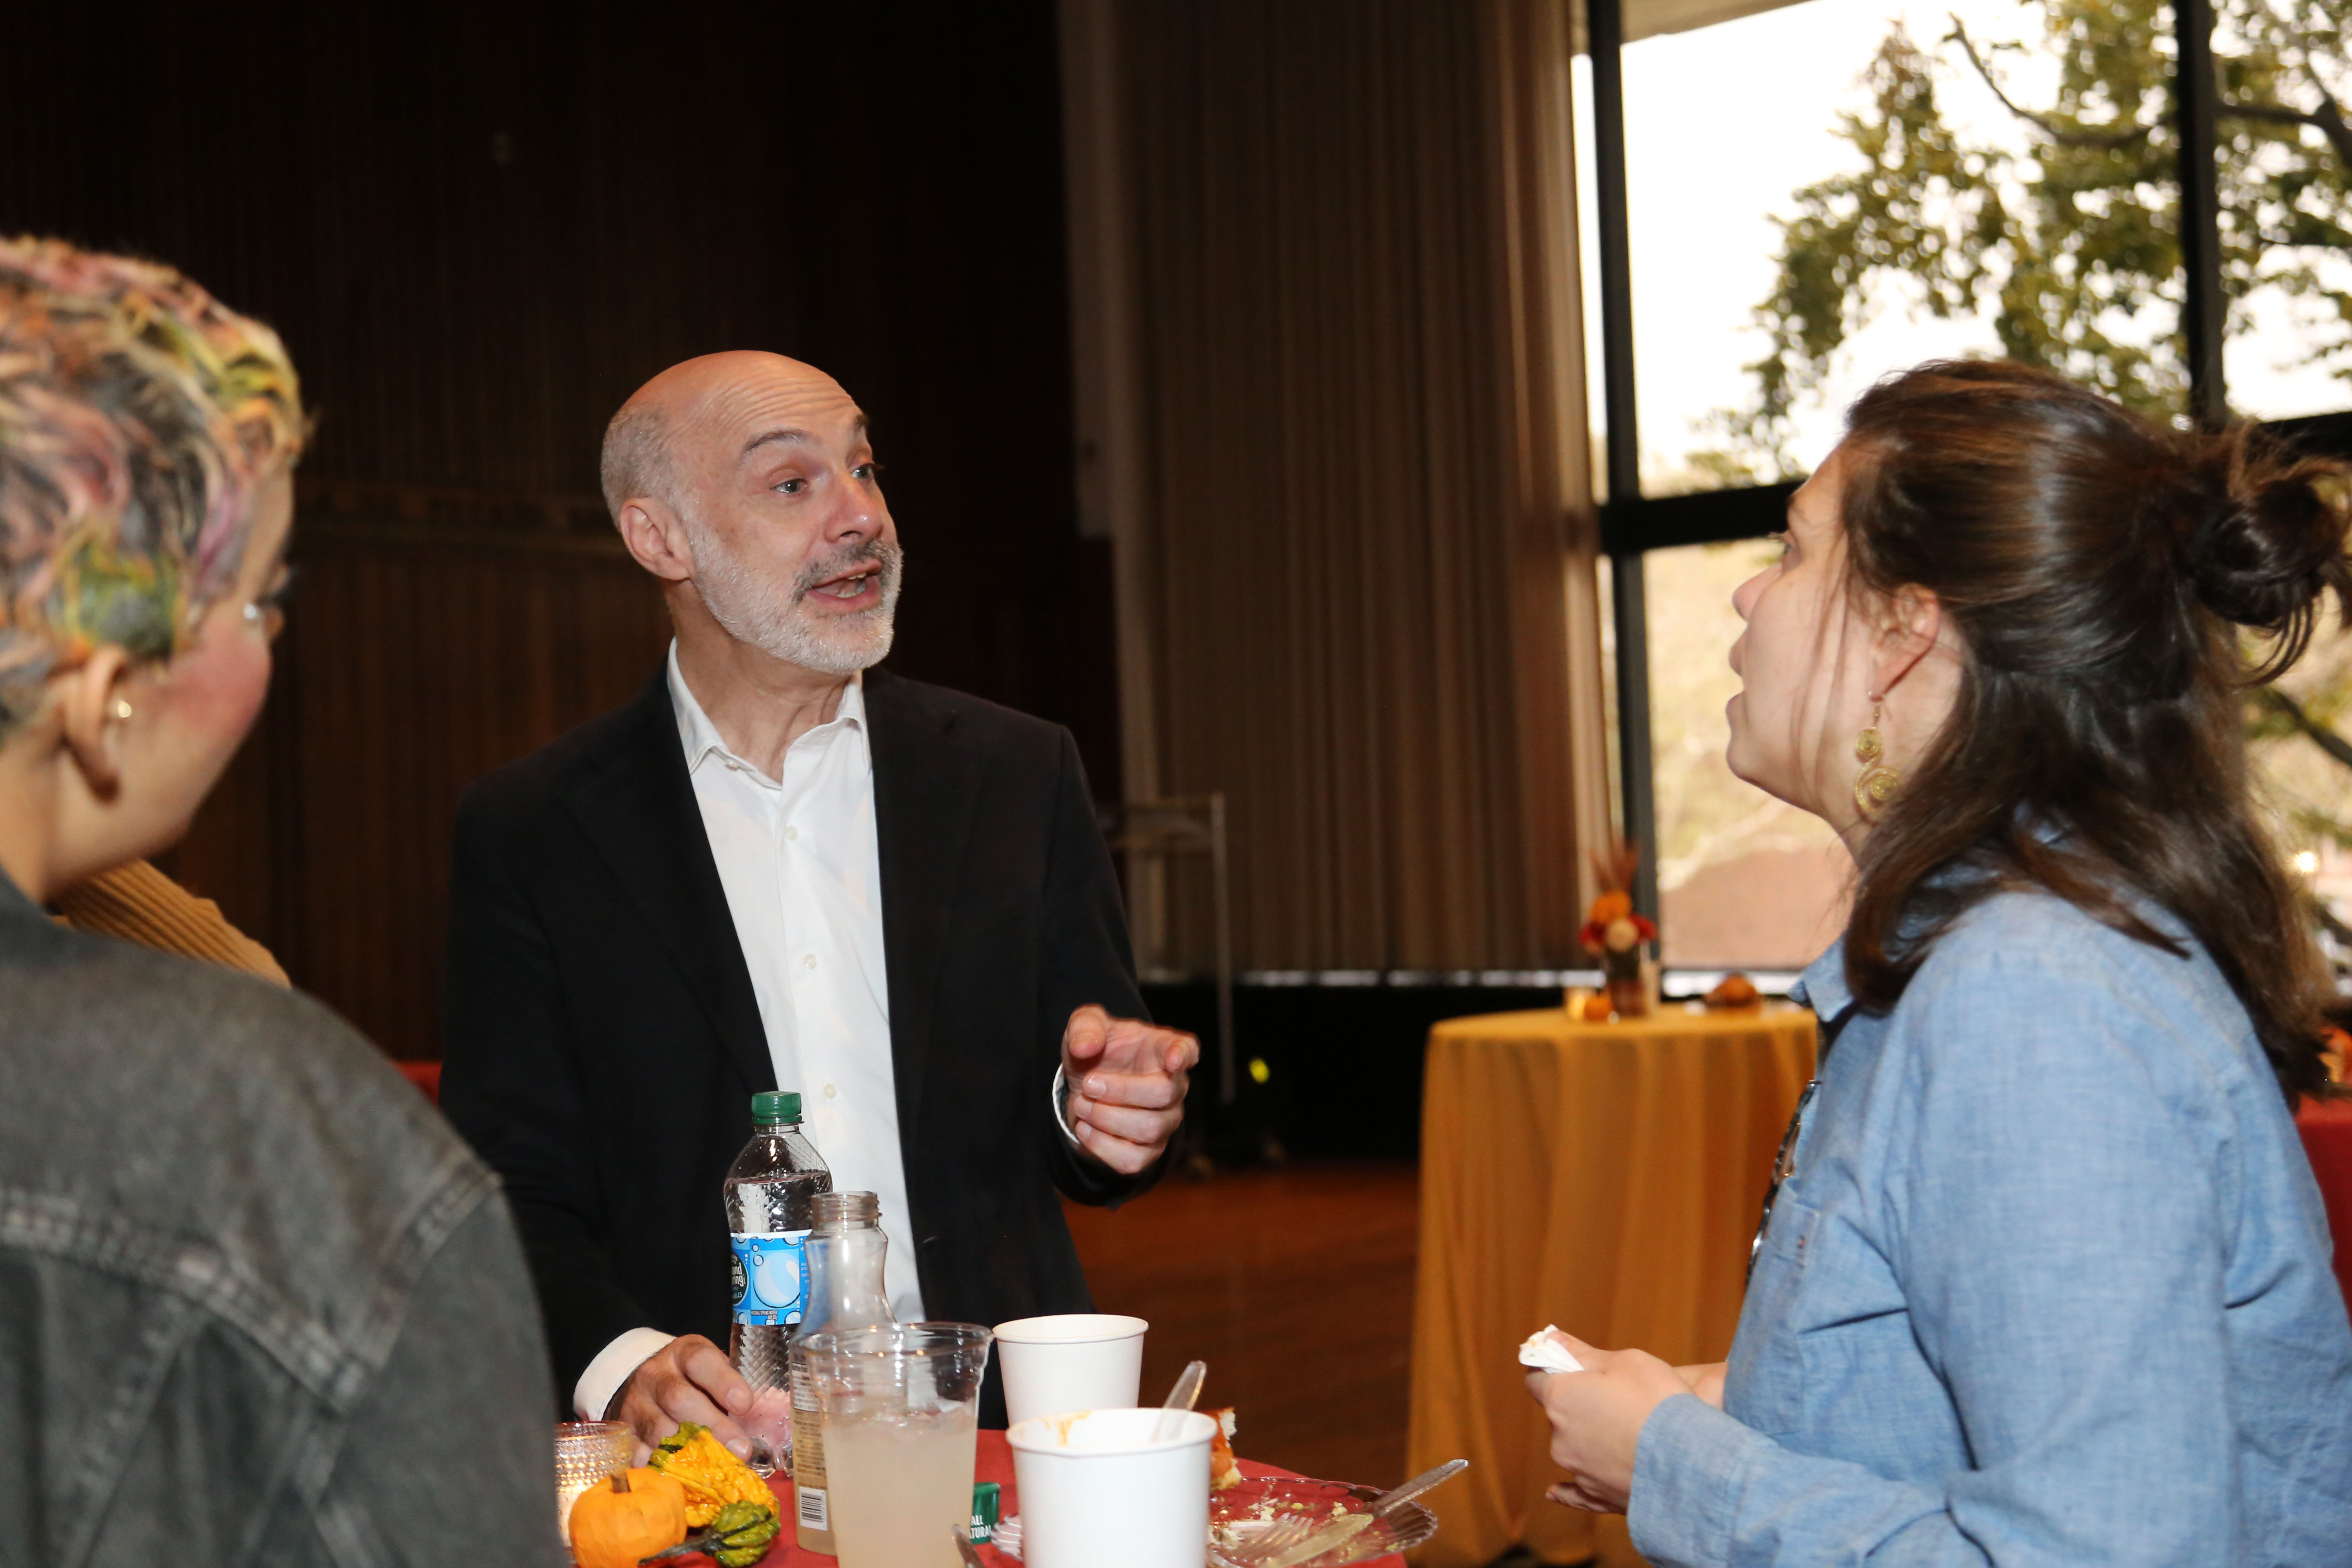 Dean Agustin Rayo and two Fall Fair attendees talk at a table